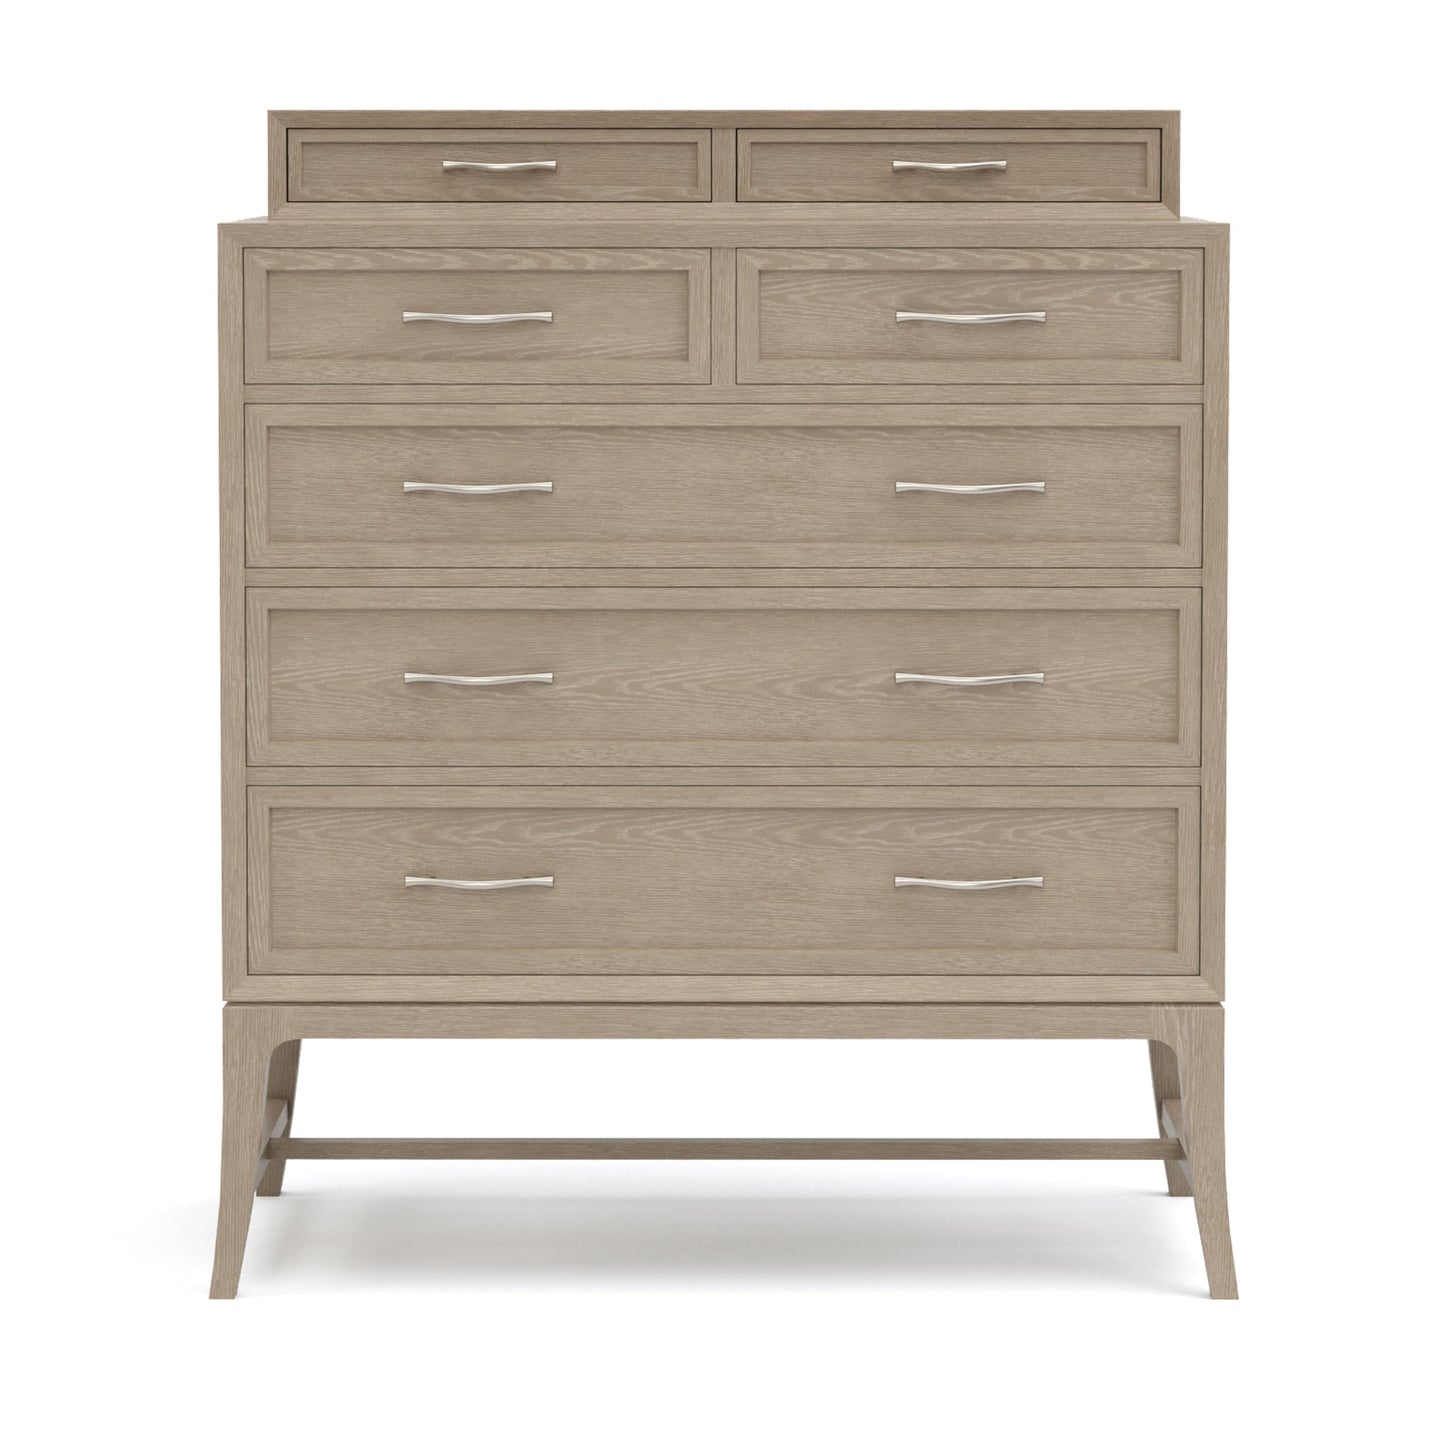 Maidstone Tall Chest with Gallery in 201 Sandbank finish